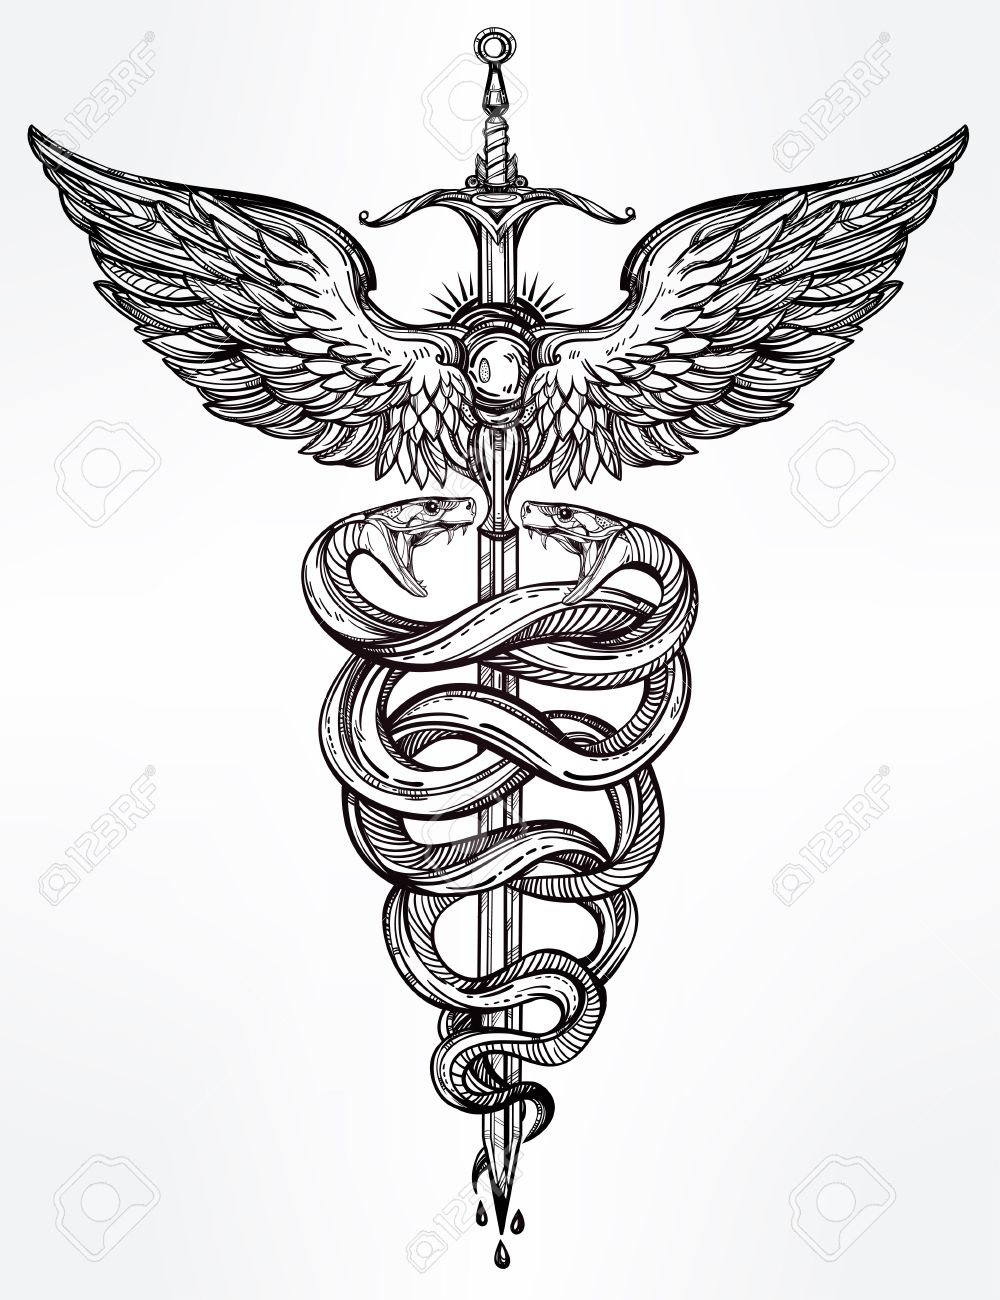 48534577-Caduceus-symbol-of-god-Mercury-Highly-detailed-hand-snakes-wrapped-around-winged-staff-Hand-drawn-vi-Stock-Vector.jpg